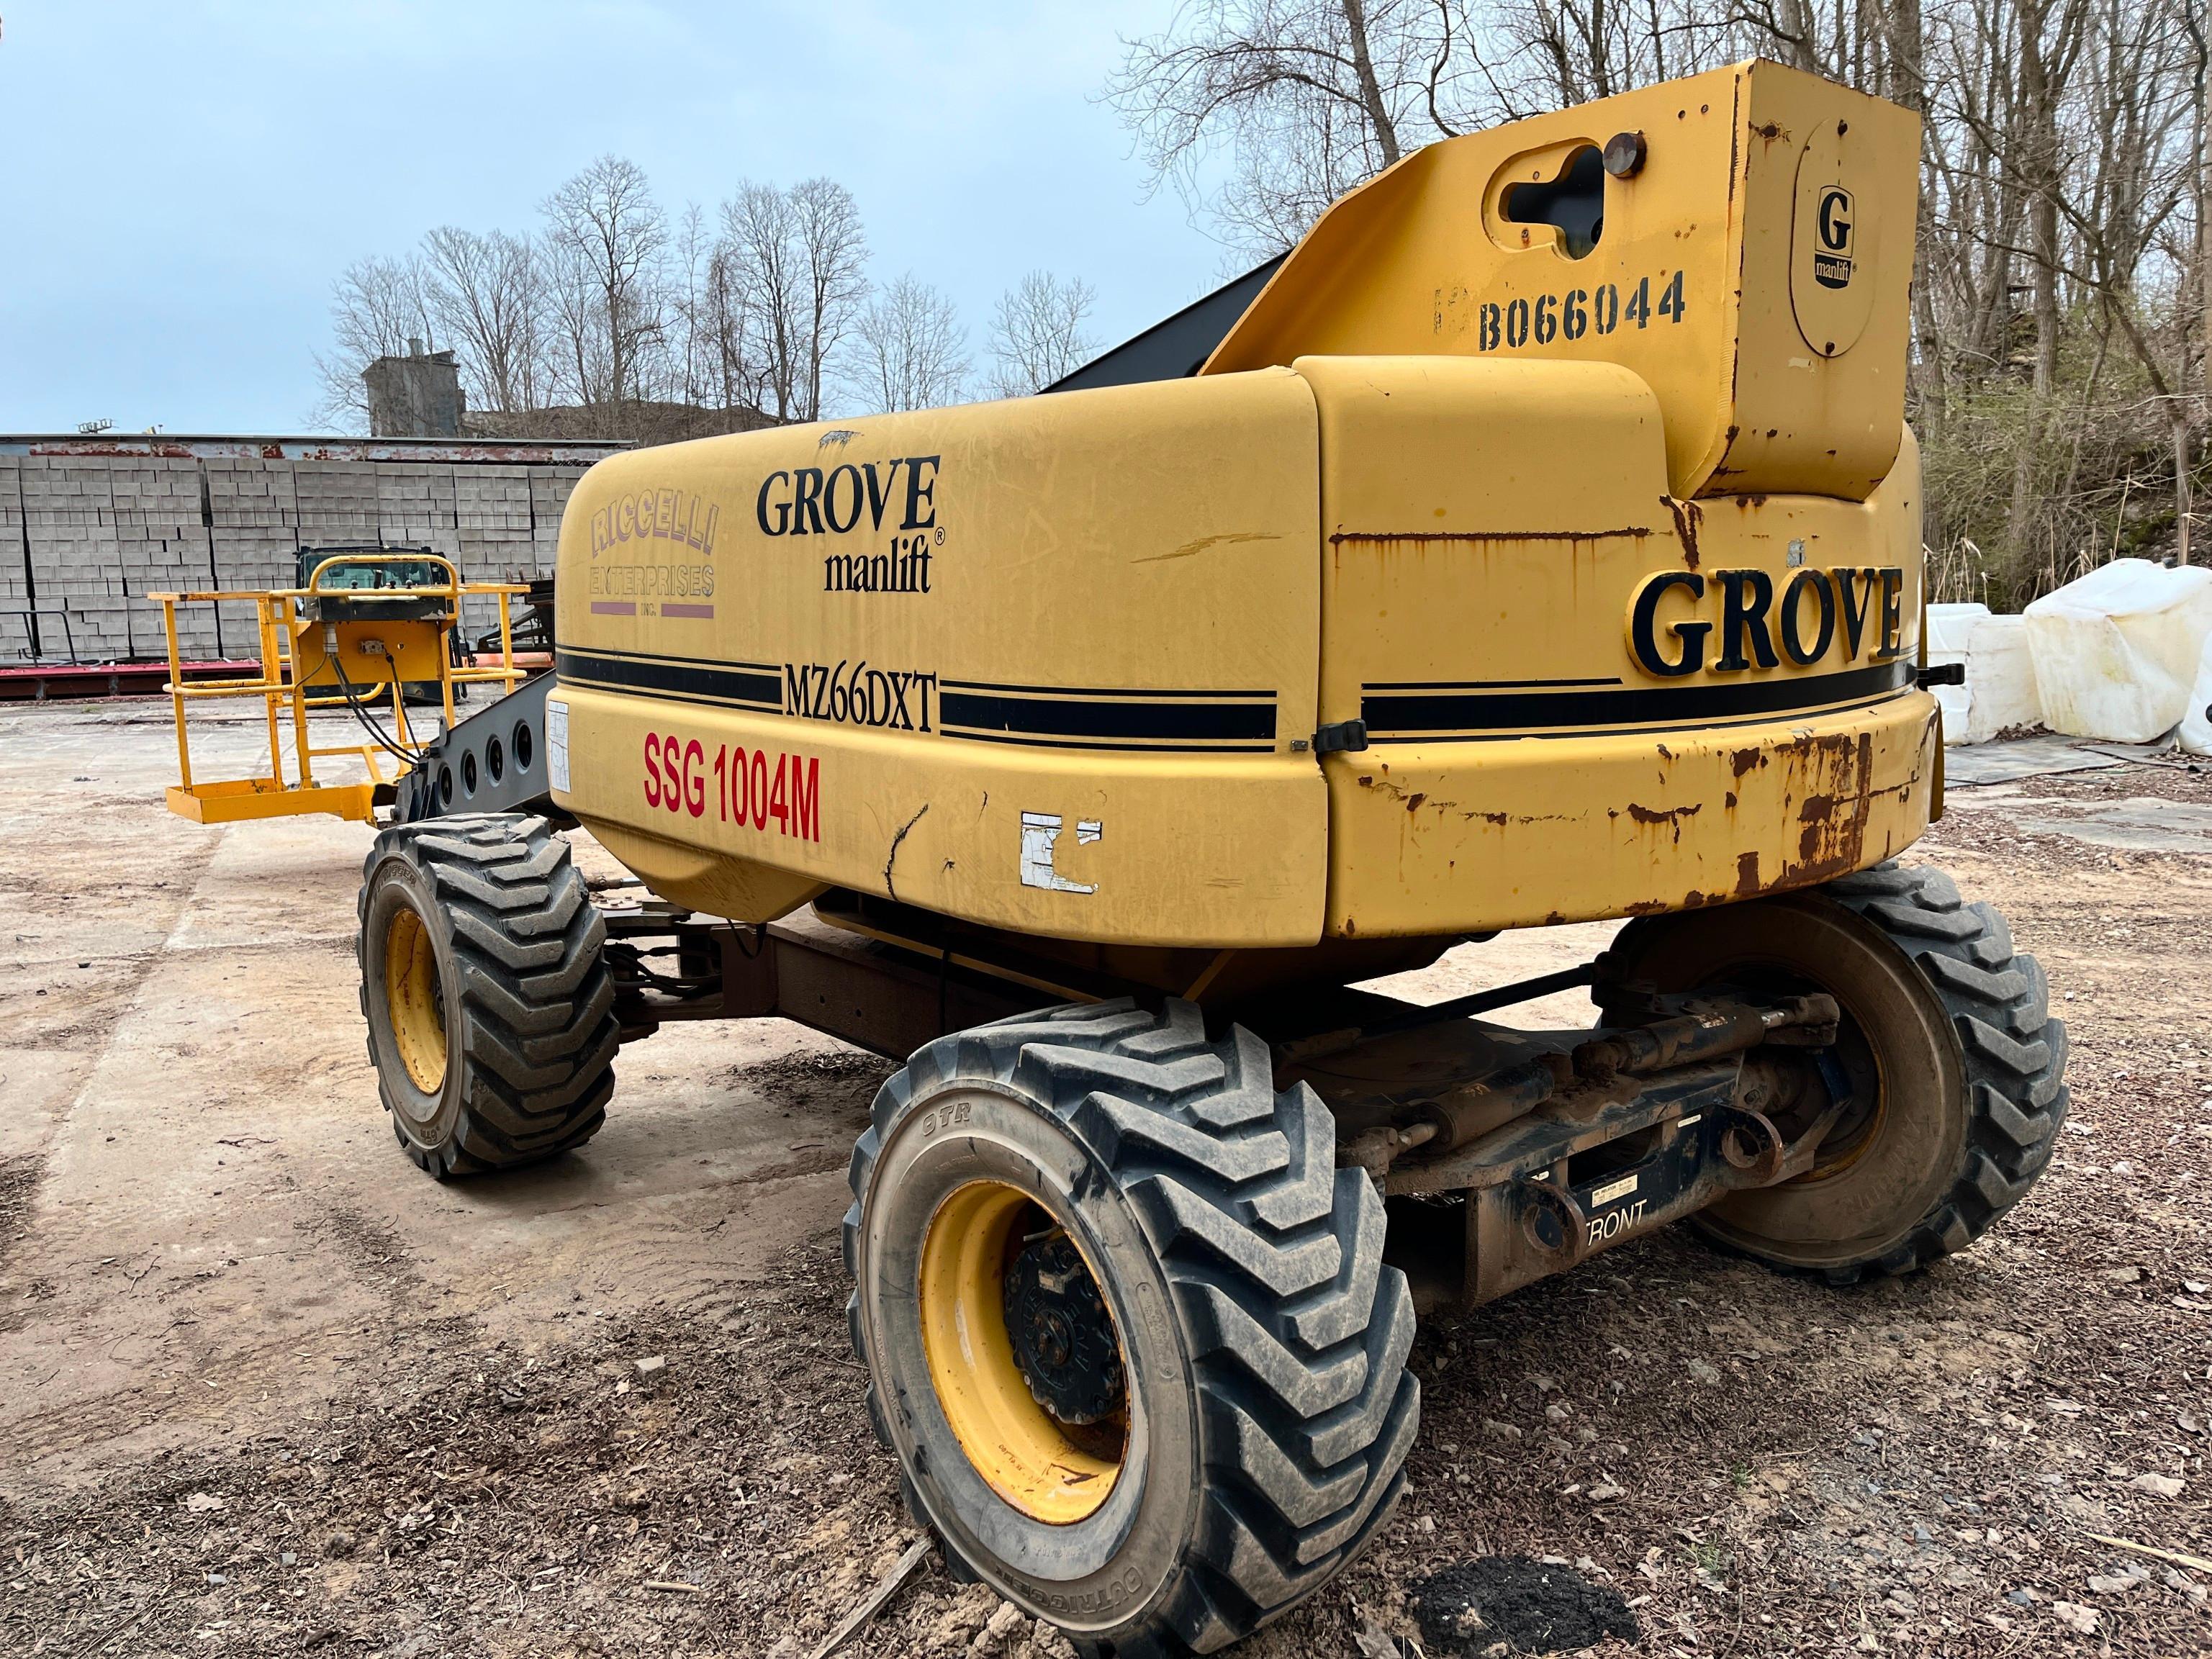 GROVE MZ66DXT BOOM LIFT SN:253158 4x4, powered by 4 cylinder dual fuel engine, equipped with 66ft.